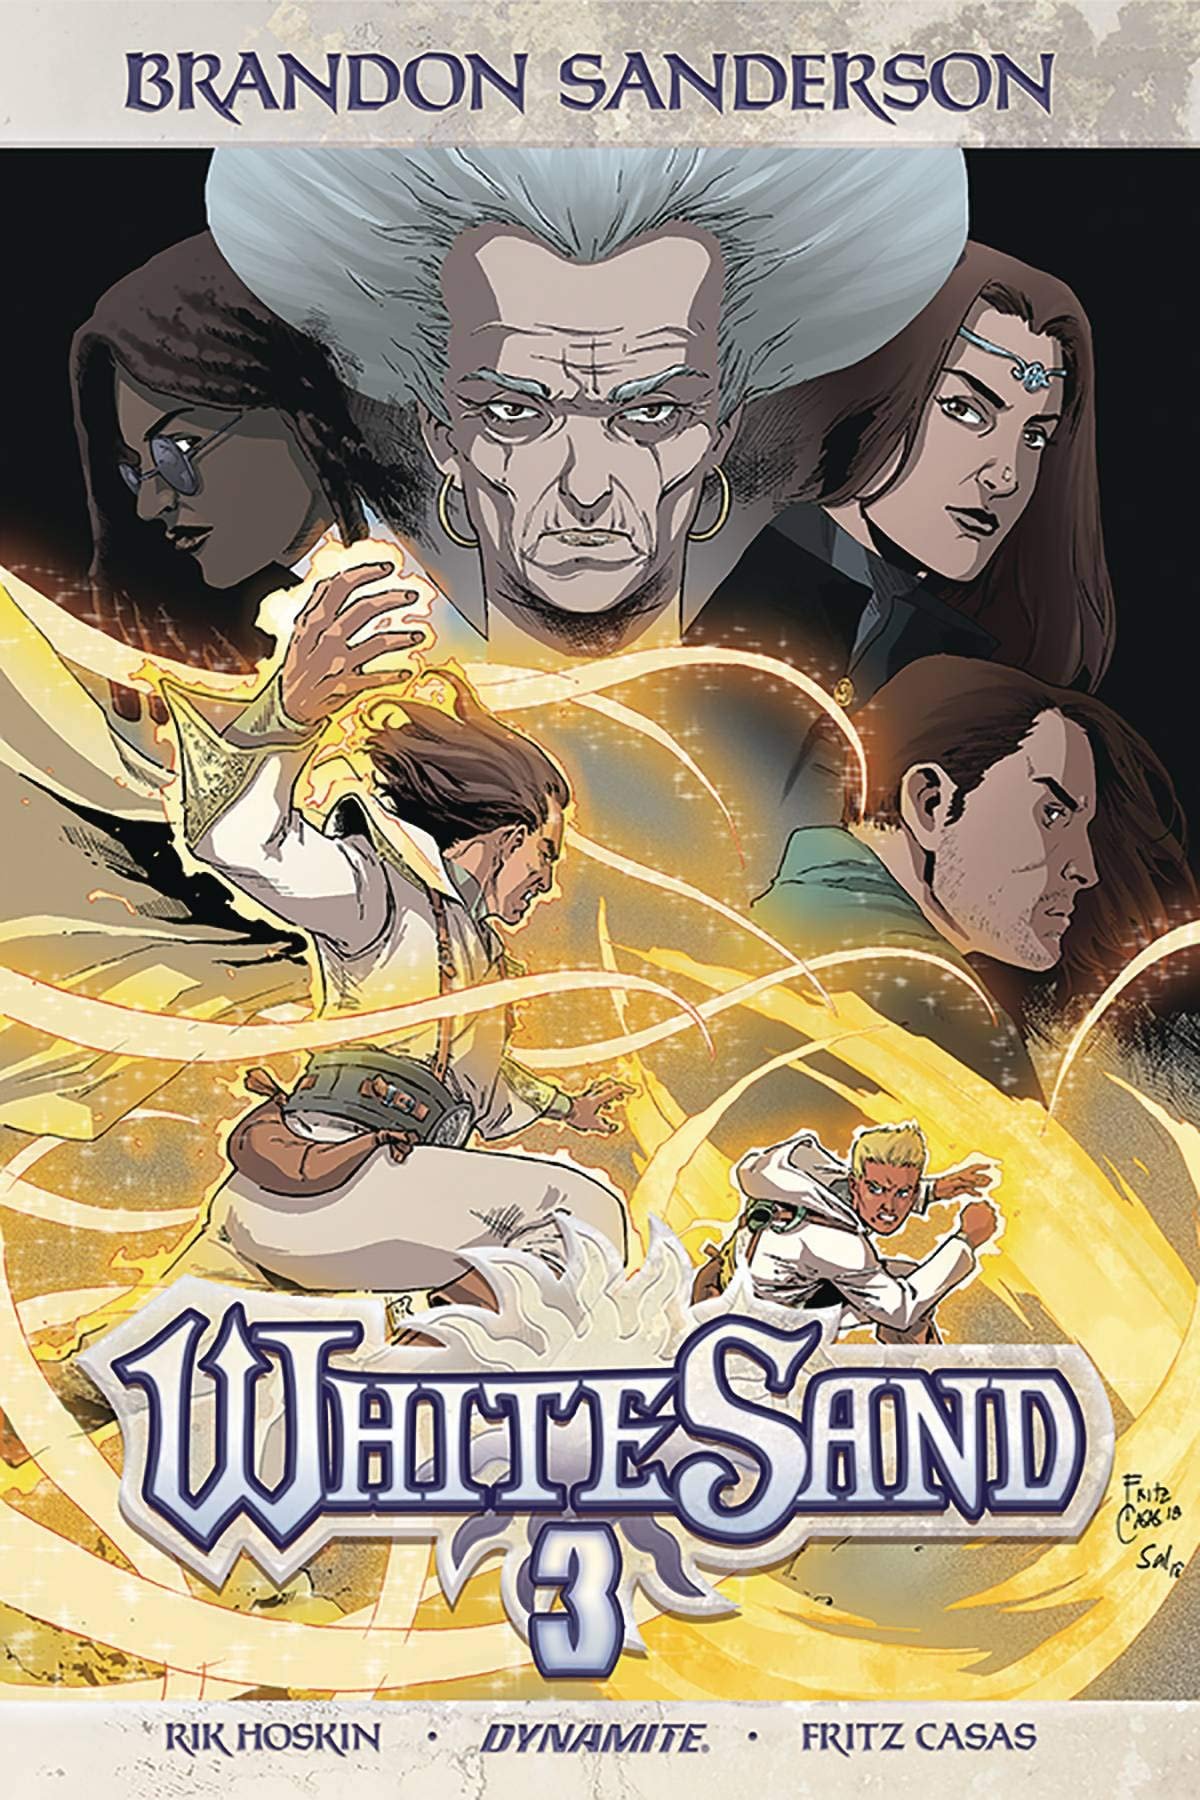 More information about "White Sand Volume 3 Is Here (Well, the Ebook)"